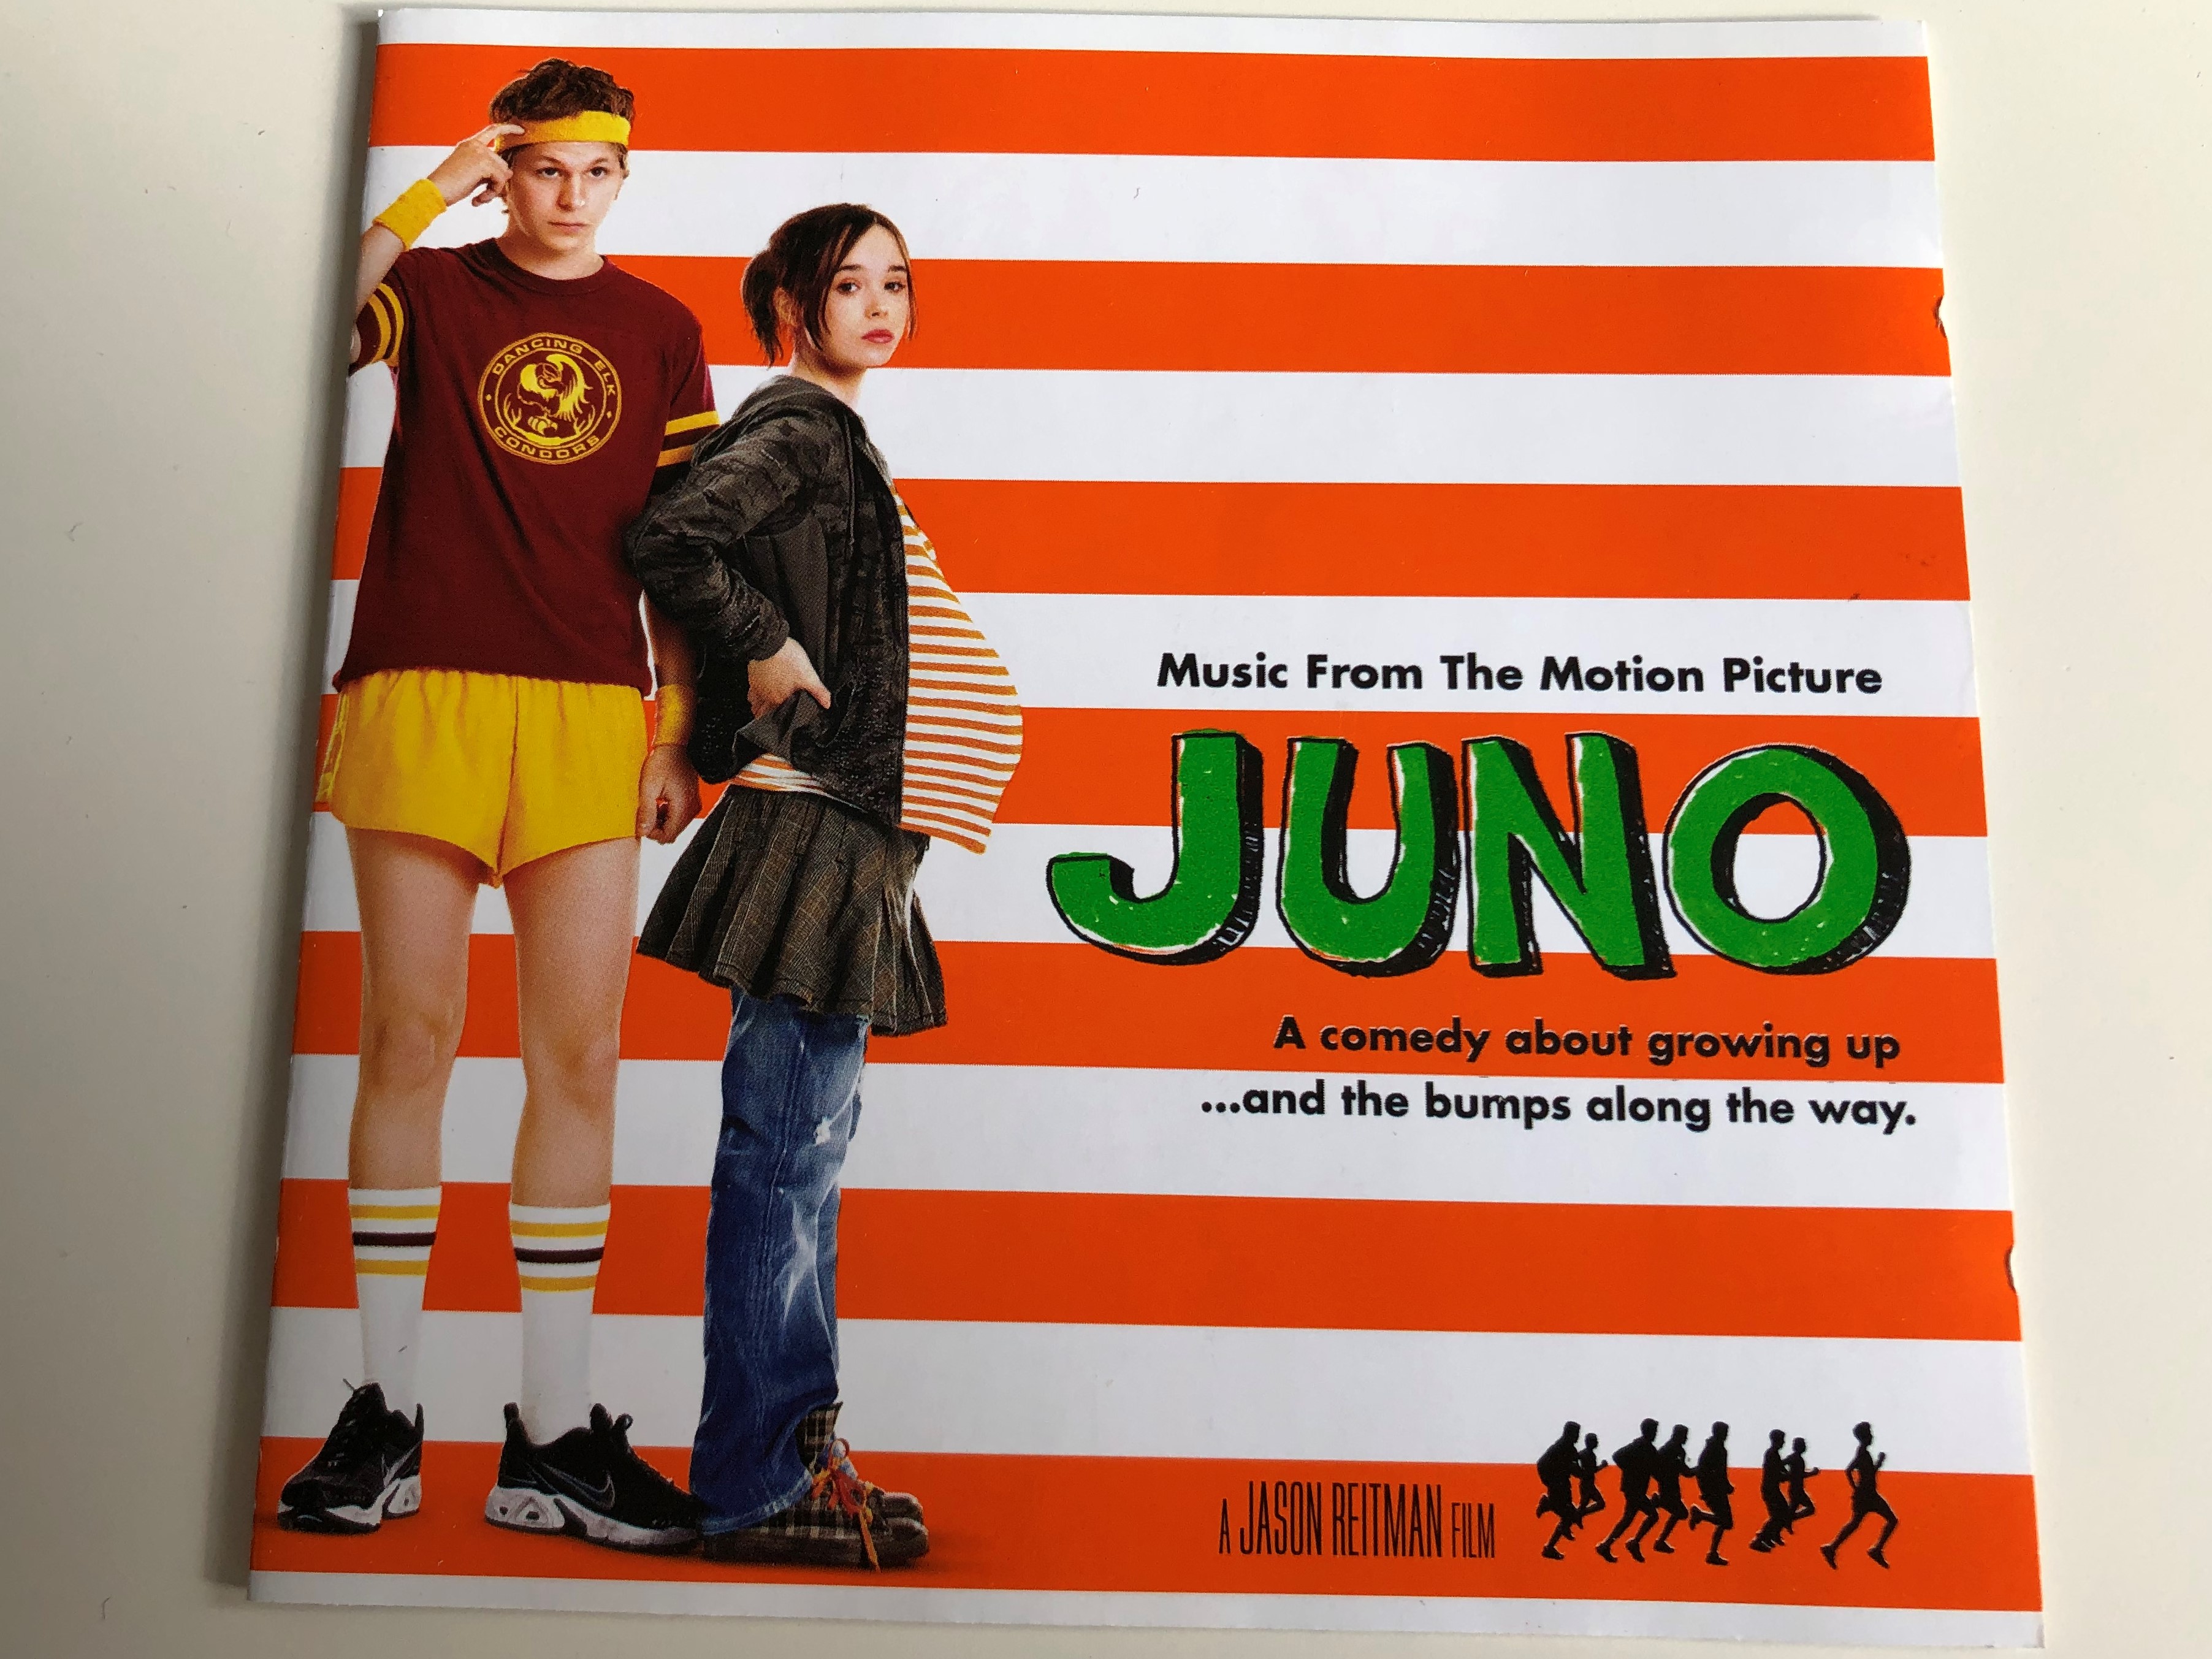 juno-music-from-the-motion-picture-a-comendy-about-growing-up-...-and-the-bumps-along-the-way-soundtrack-by-jason-reitman-peter-afterman-margaret-yen-audio-cd-2007-1-.jpg